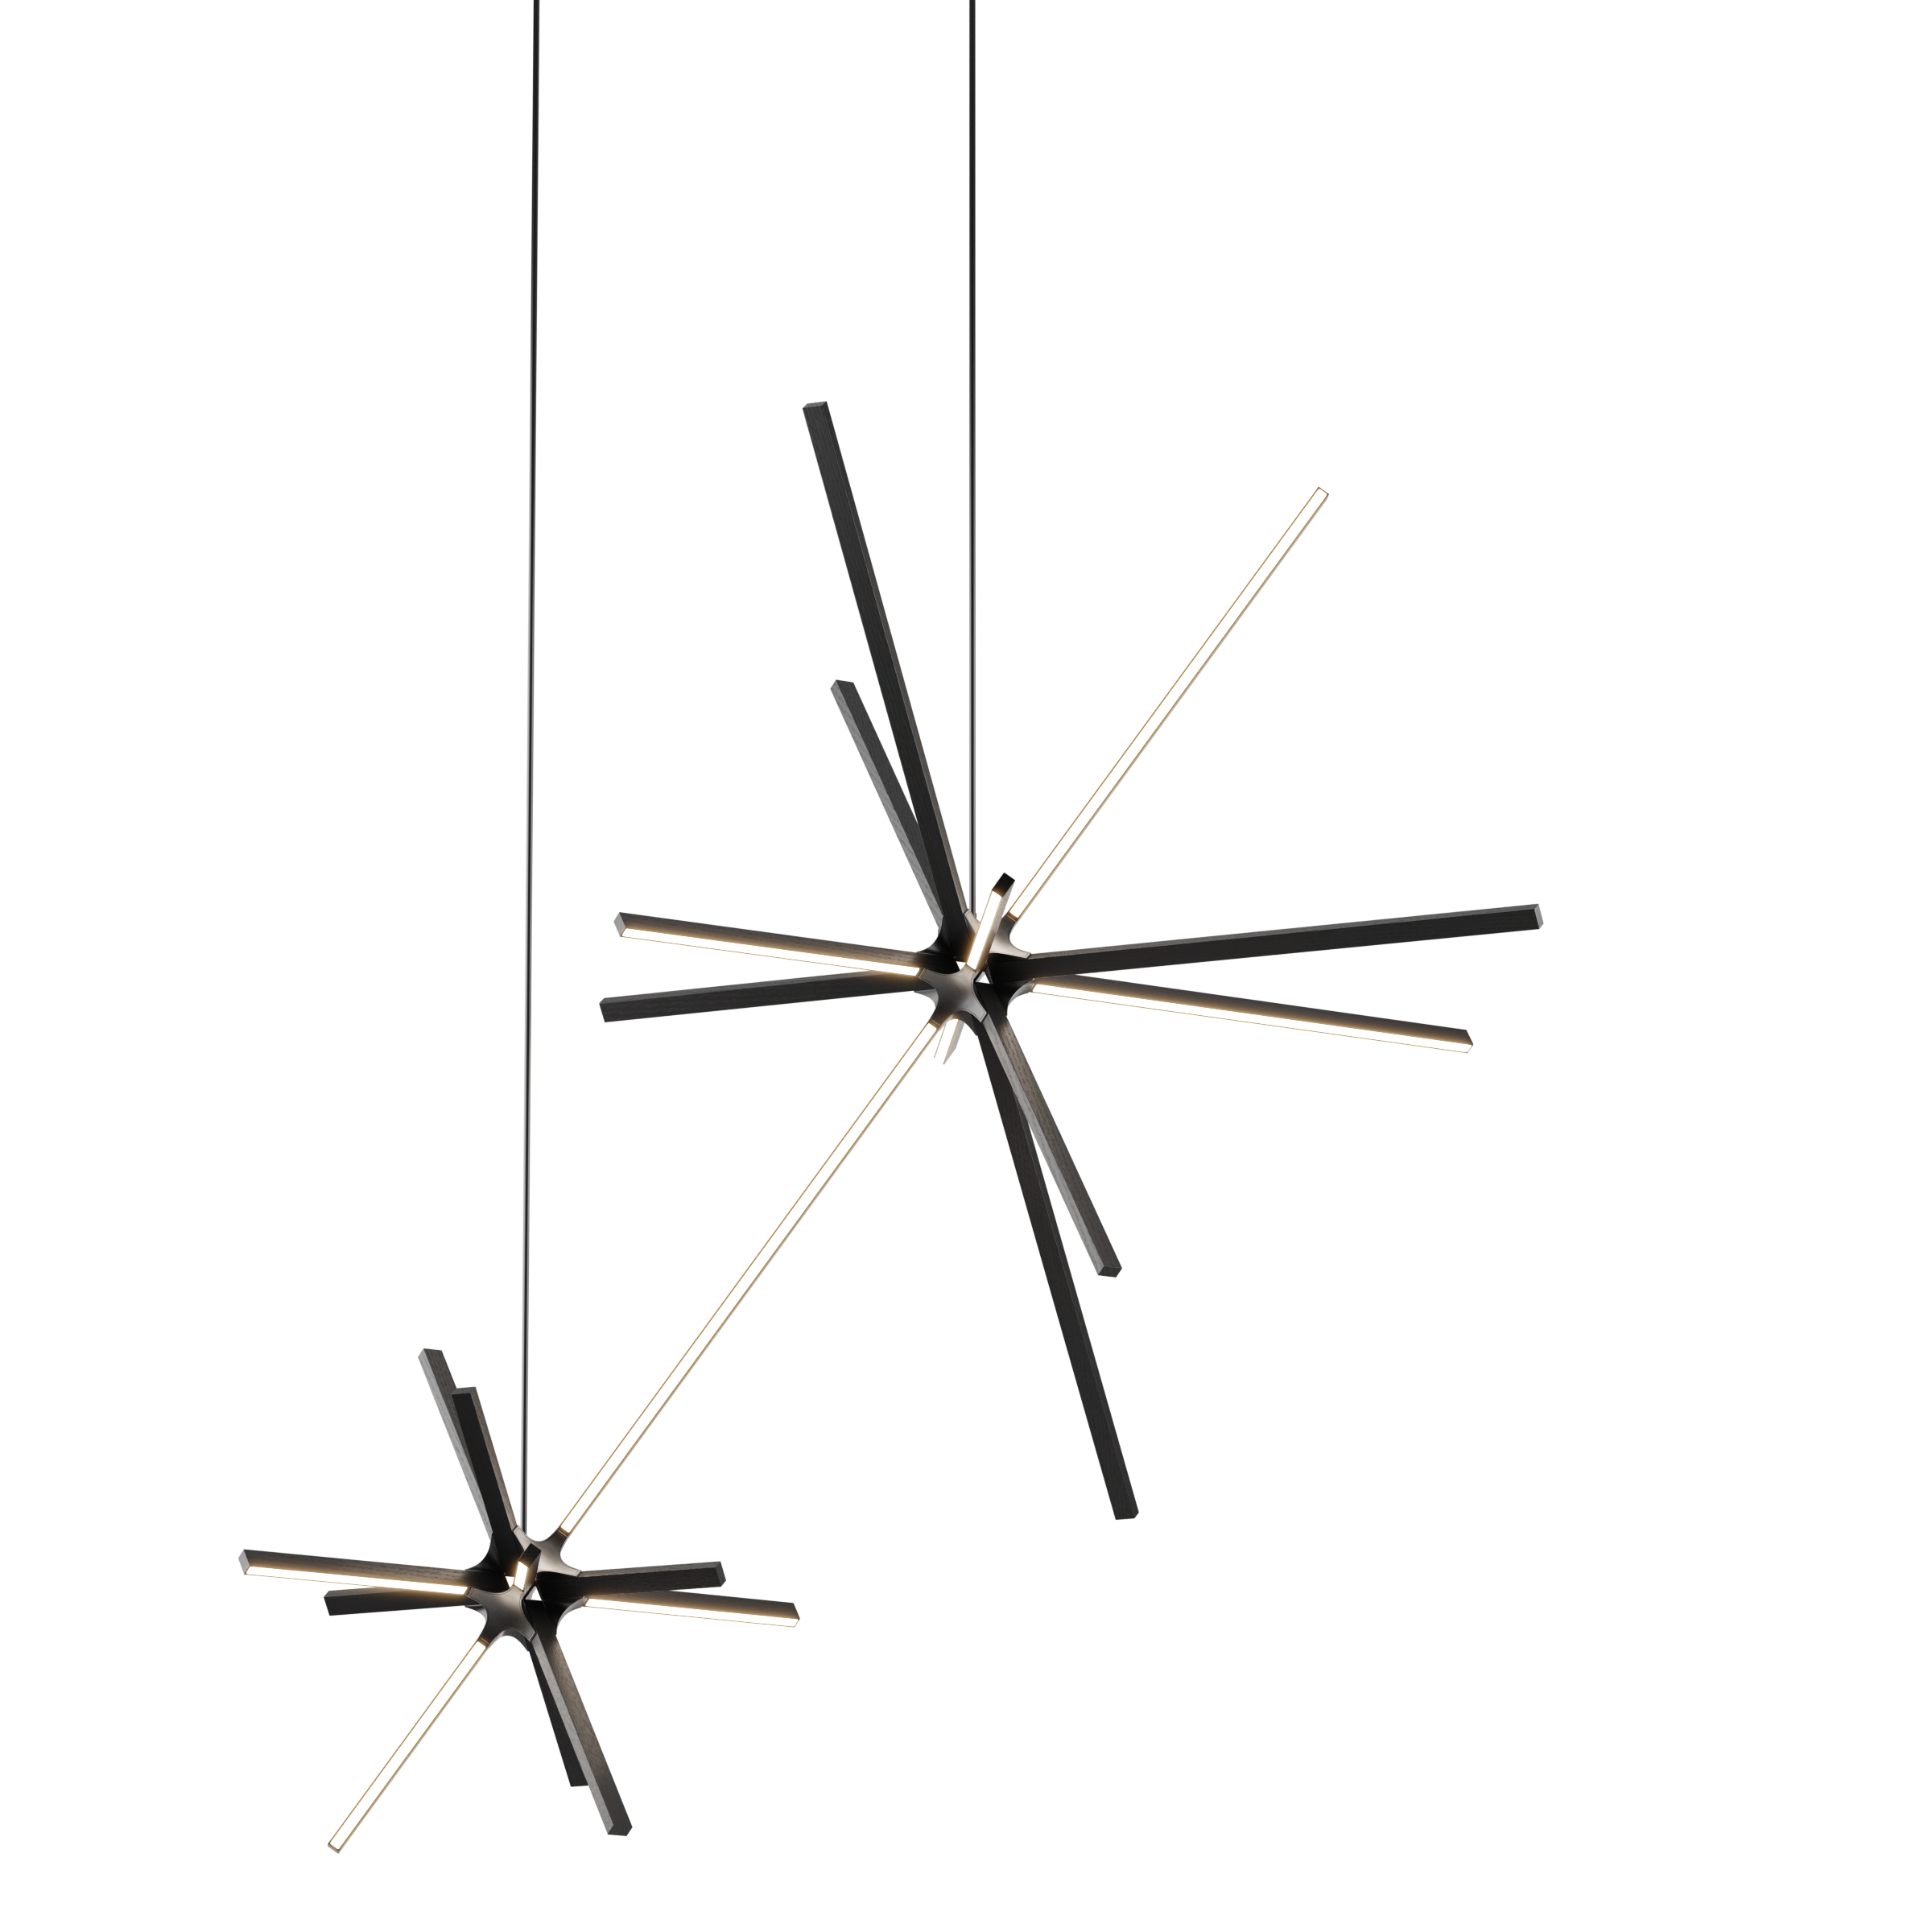 Image of a Stickbulb Double Boom lighting fixture. The modern fixture consists of sleek wooden beams with multiple integrated LED bulbs.